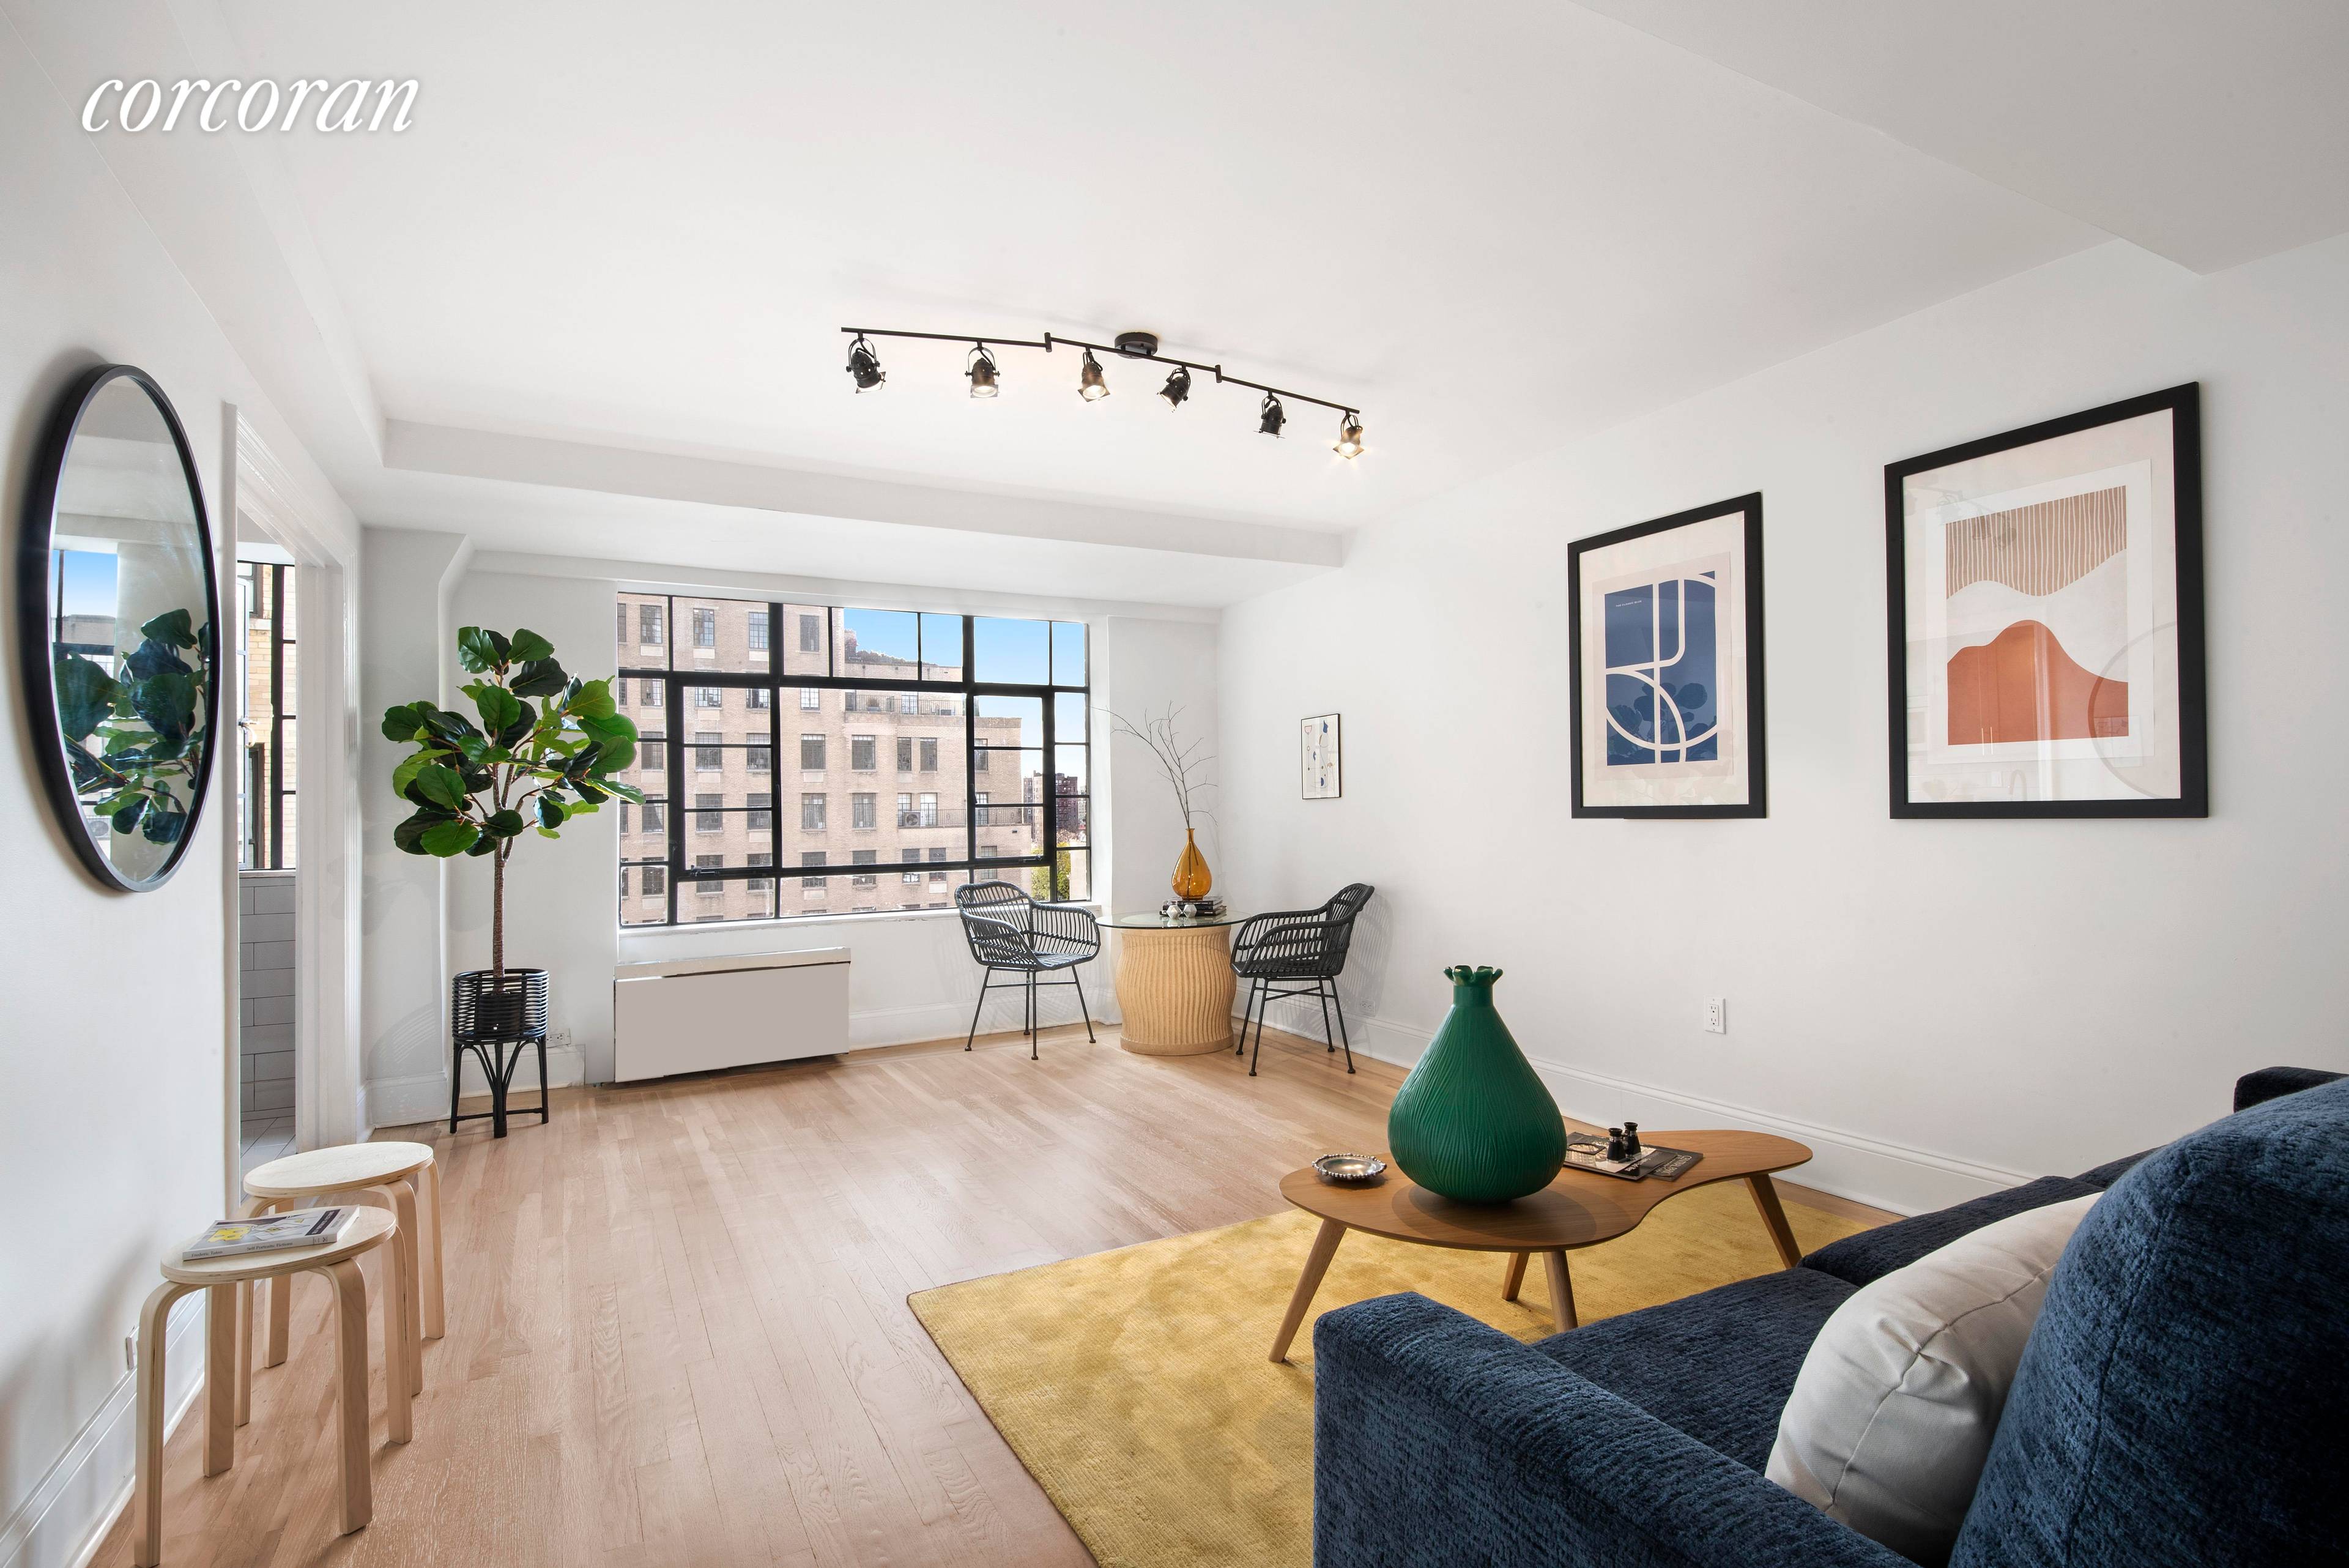 Residence 10E is a fully renovated studio at the highly coveted address of Central Park West.